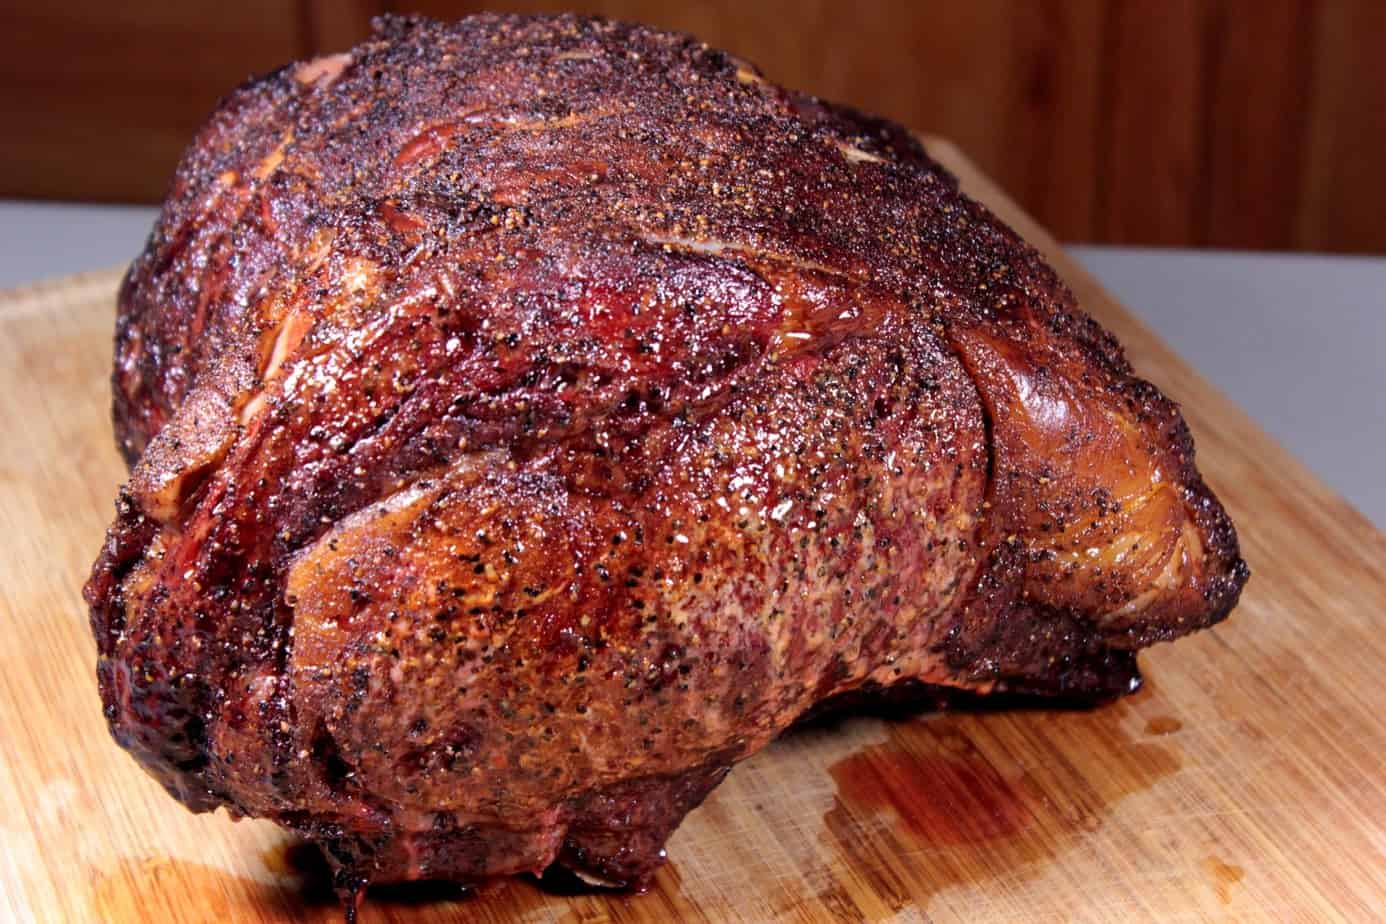 Smoked Prime Rib For Christmas Smoking Meat Newsletter,How To Clean A Bathtub With Comet